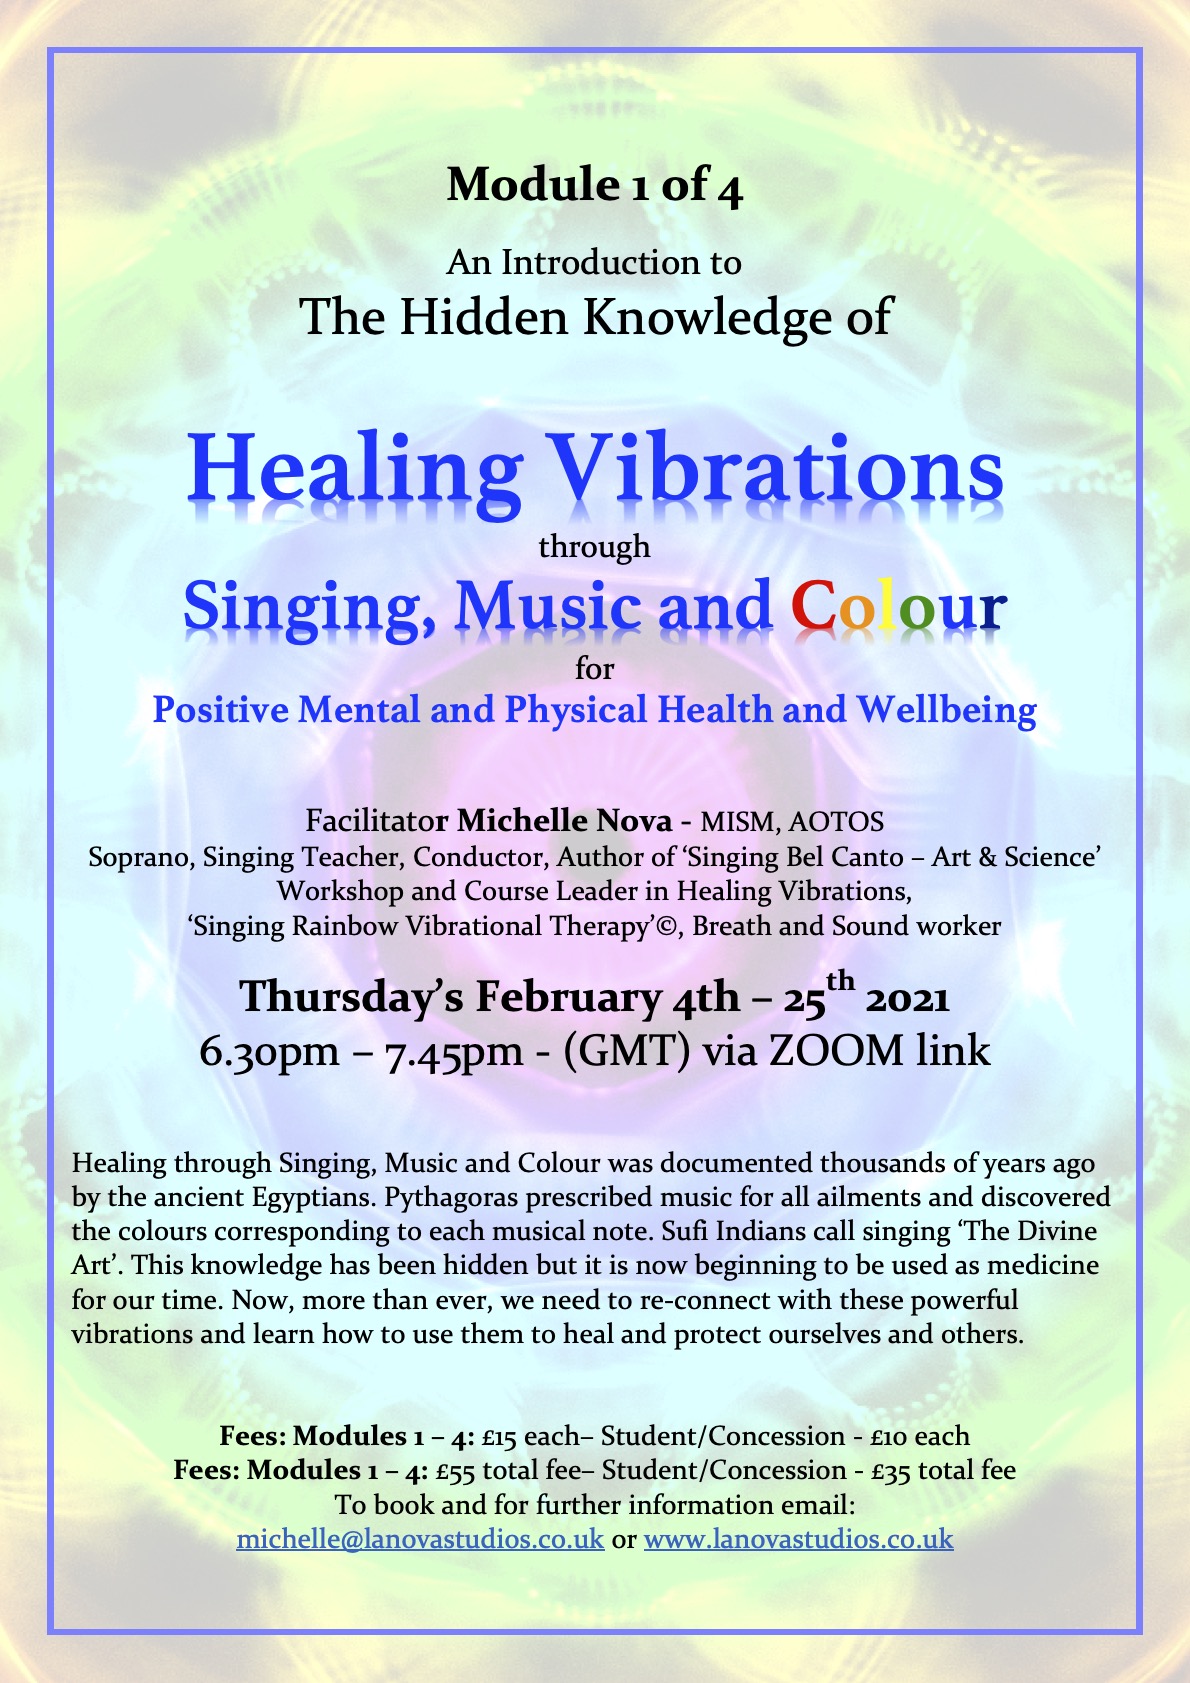 Hidden Knowledge of 'Healing Vibrations through Singing, Music & Colour,' for Po